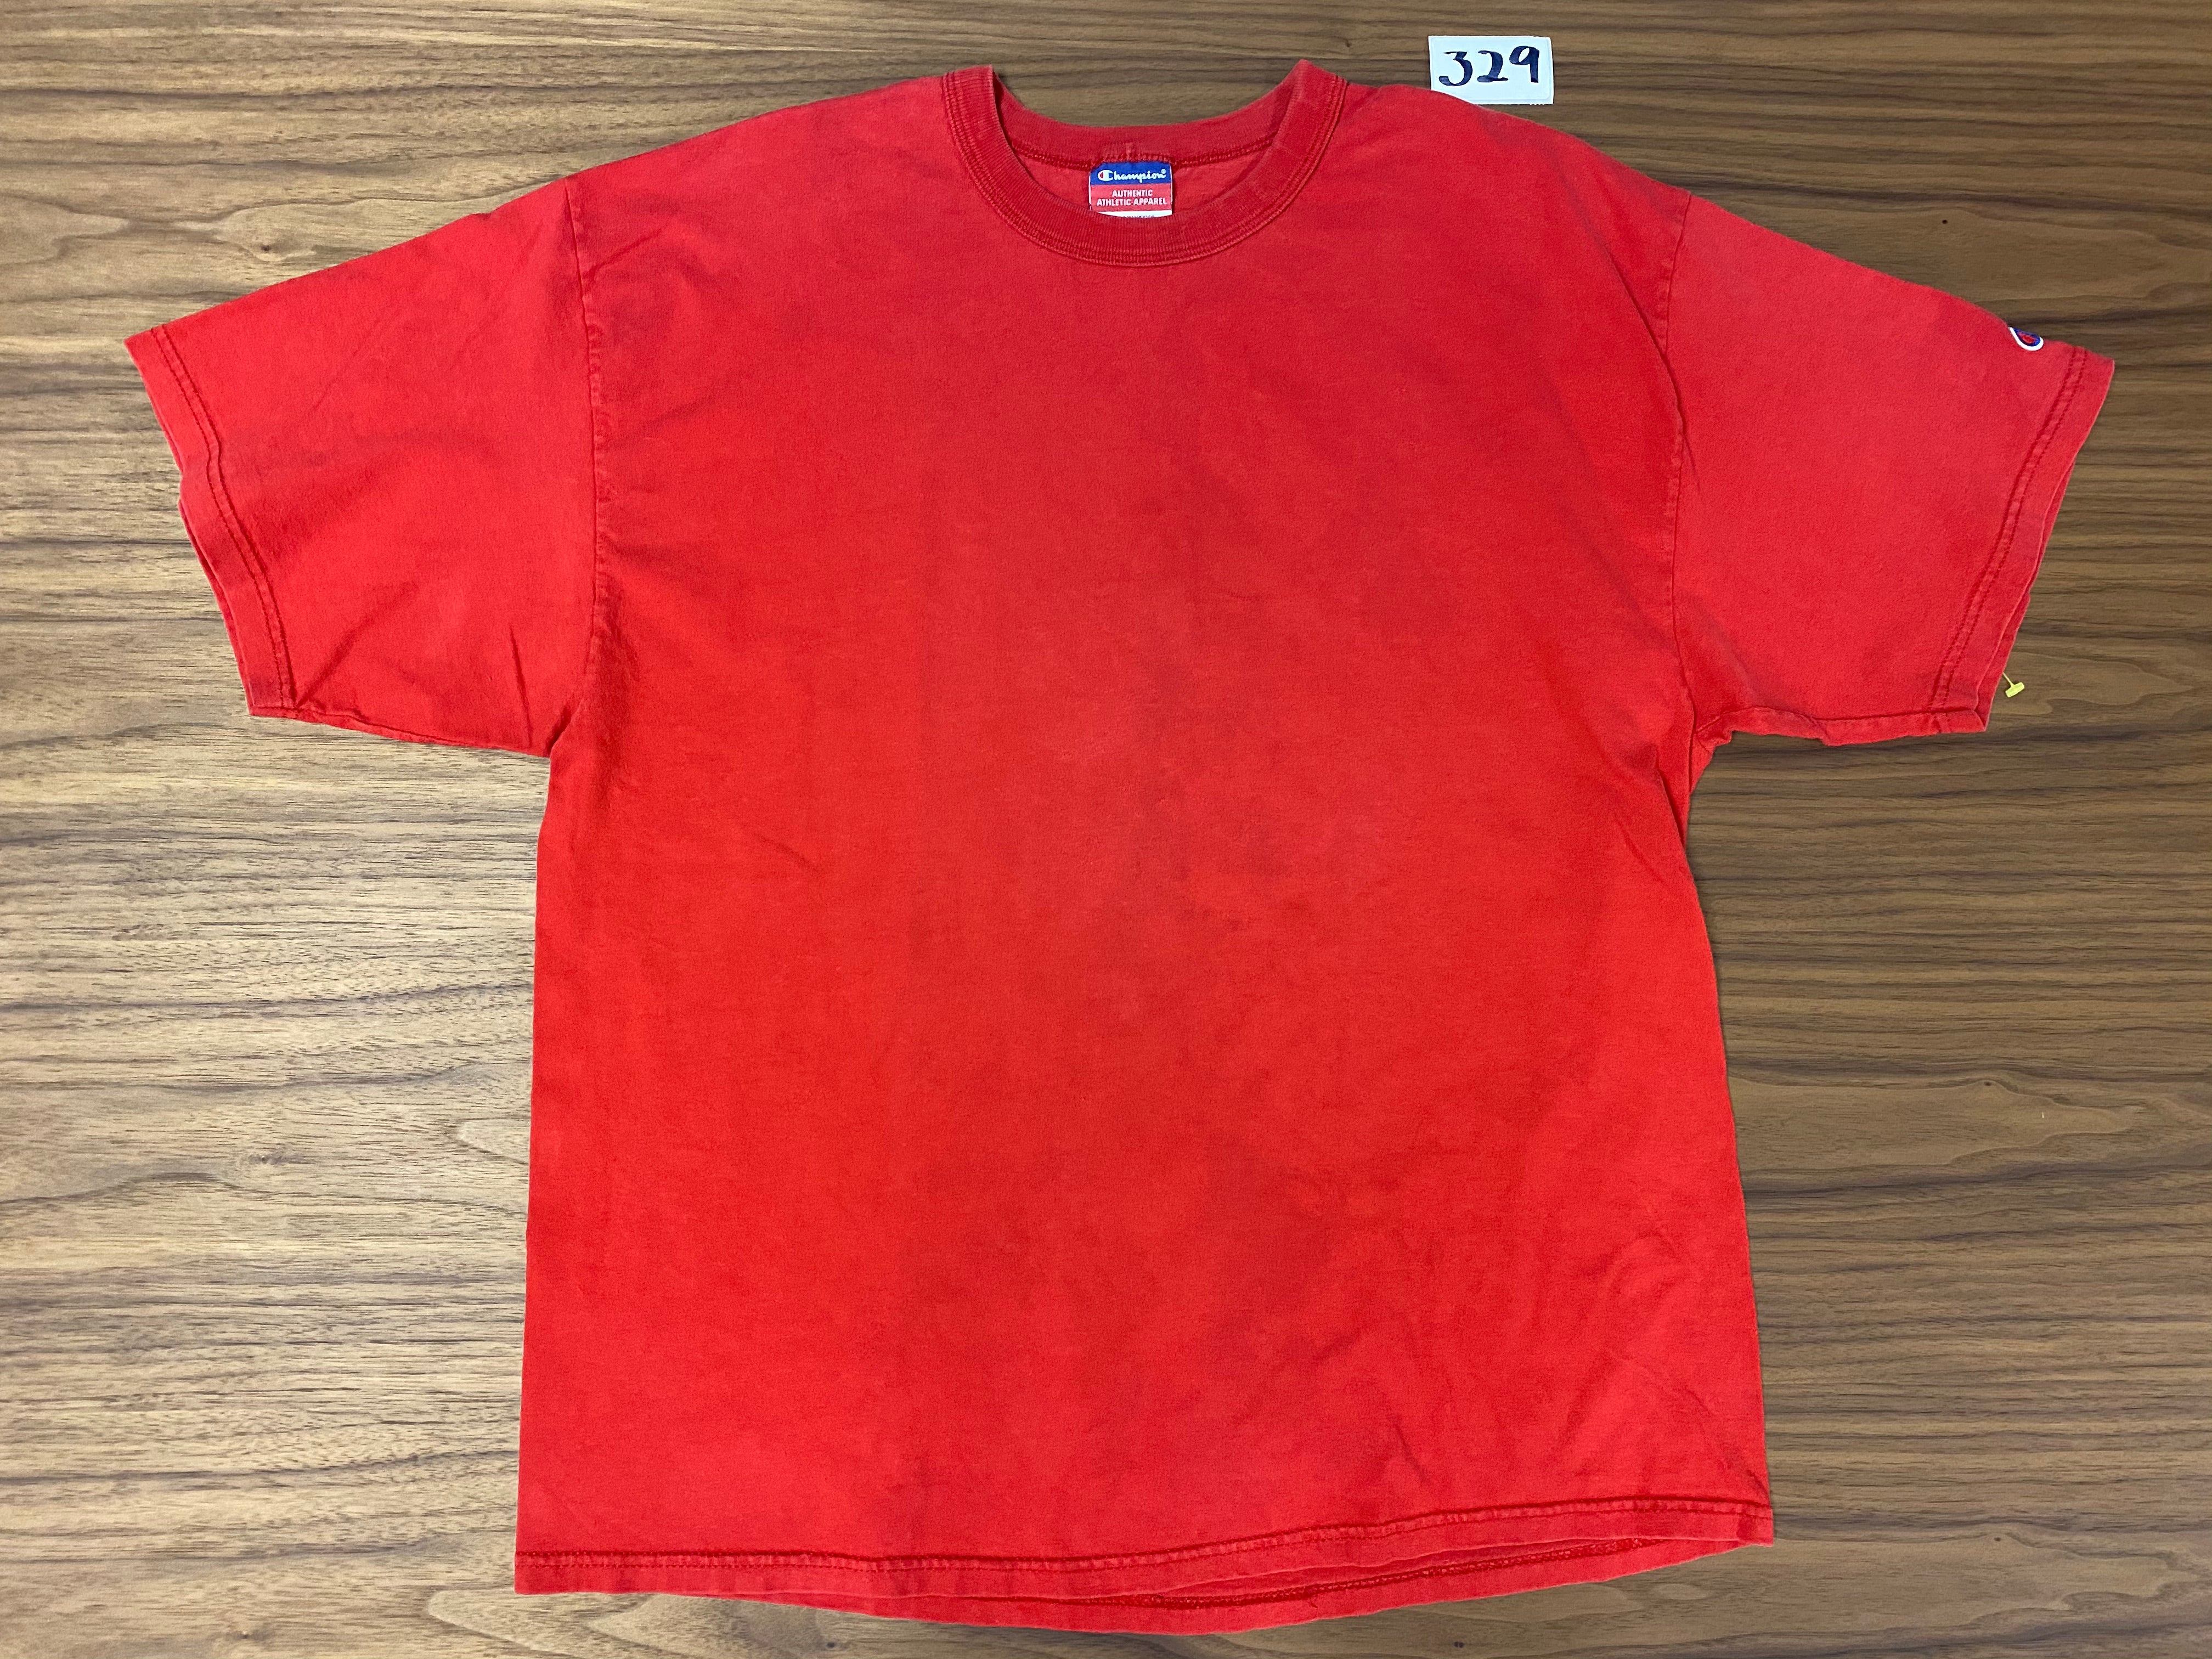 Champion Blank Tee - Red